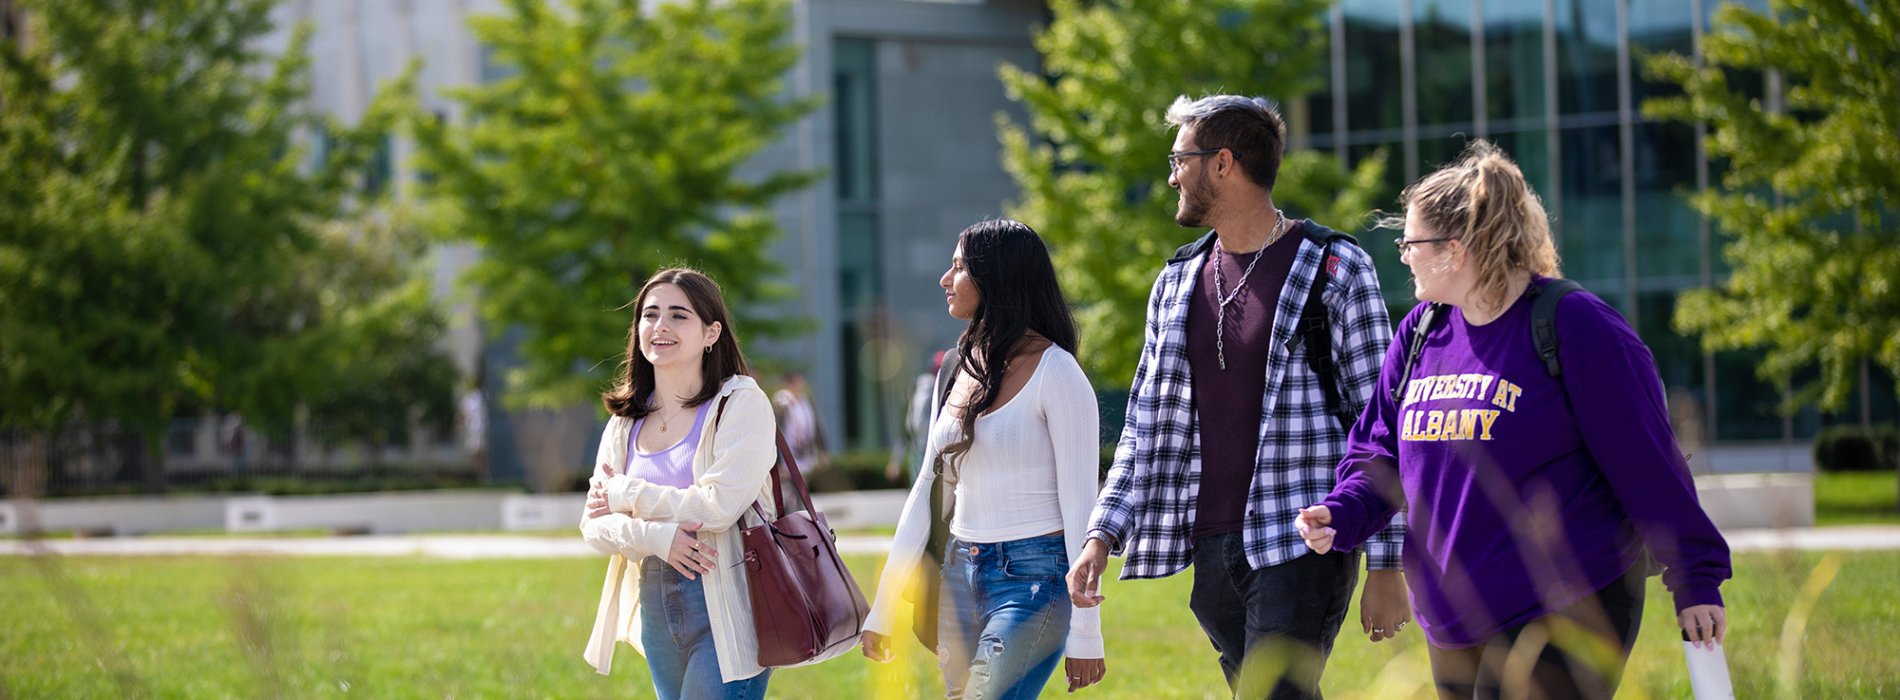 Students walking together on campus.